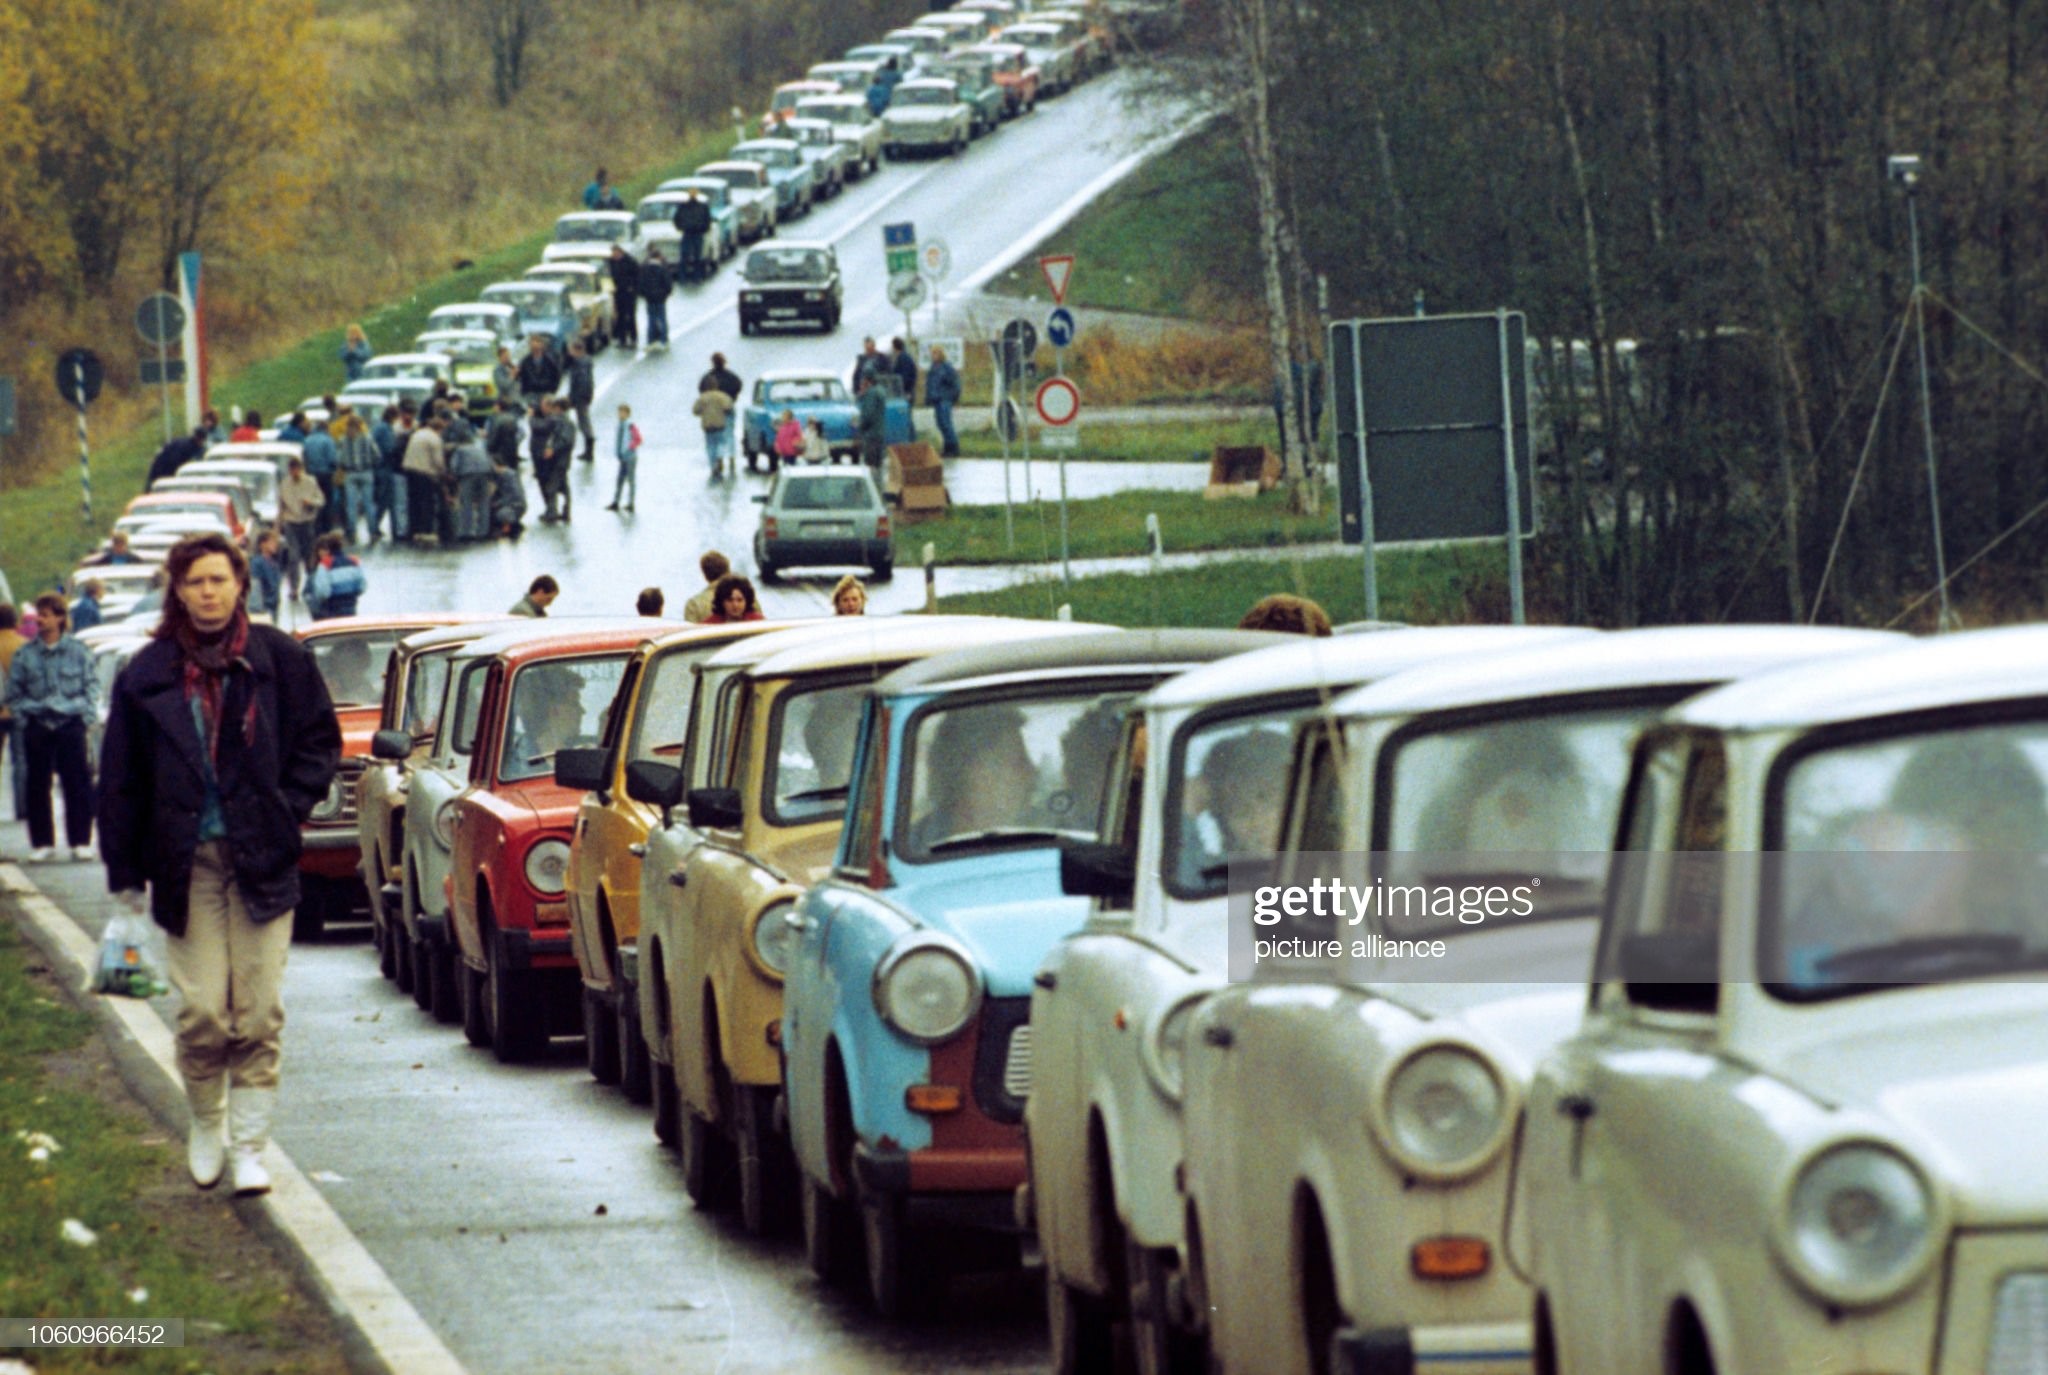 A sheer endless column of cars from the GDR, mostly Trabis and Ladas, has formed in front of the border crossing point between the former CSSR and Western Germany / Bavaria in Schirnding, November 5th 1989.